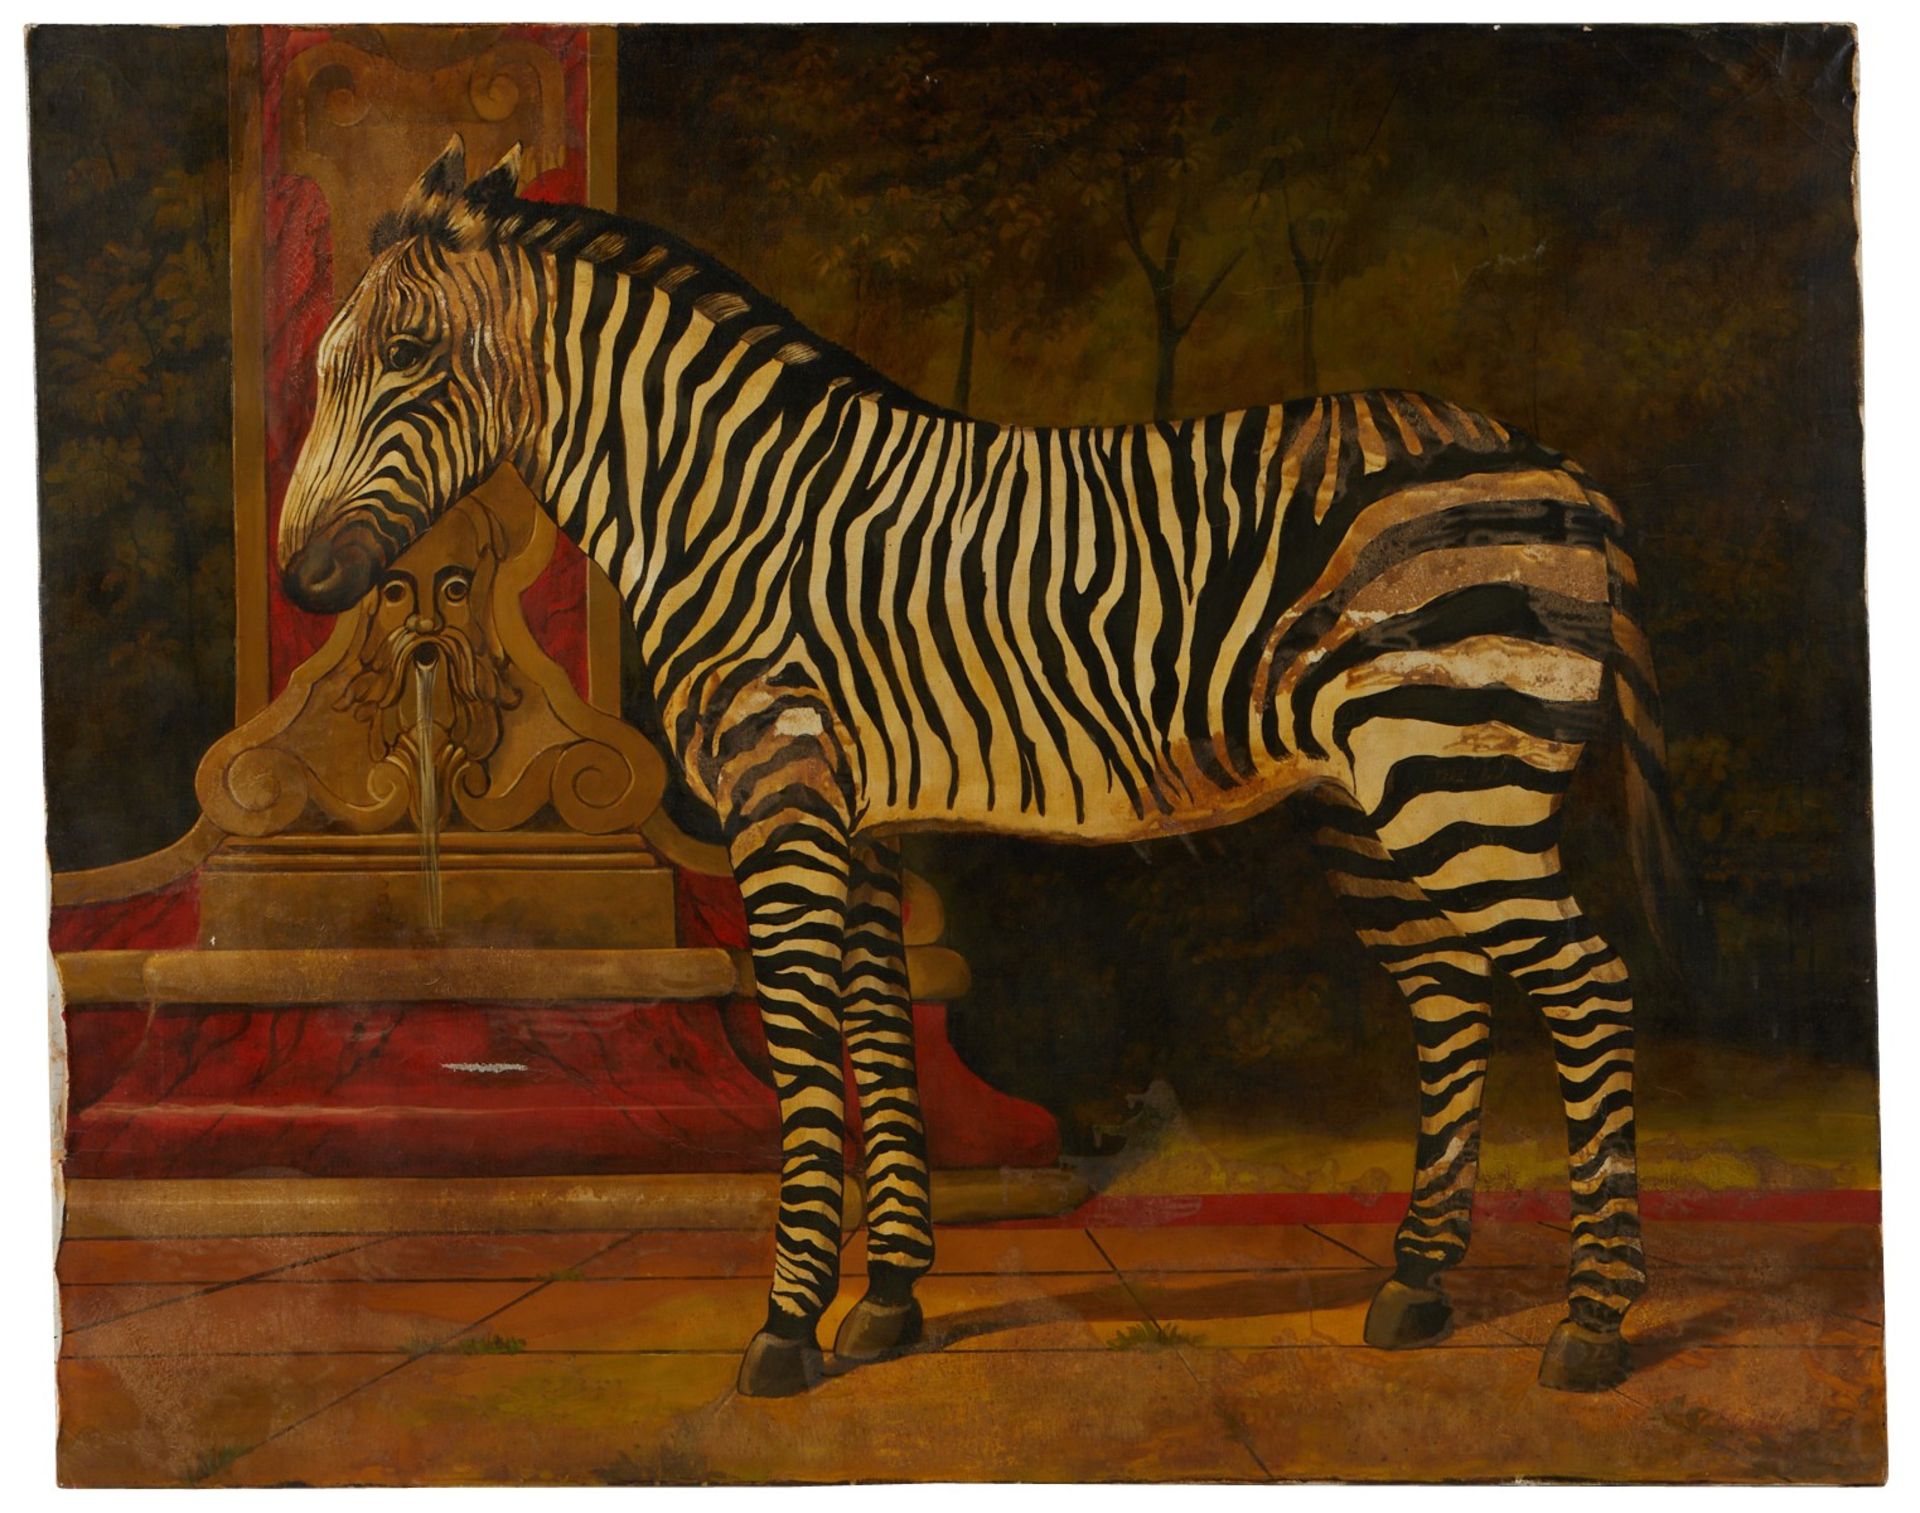 William Skilling Zebra Oil on Canvas Painting - Image 3 of 16